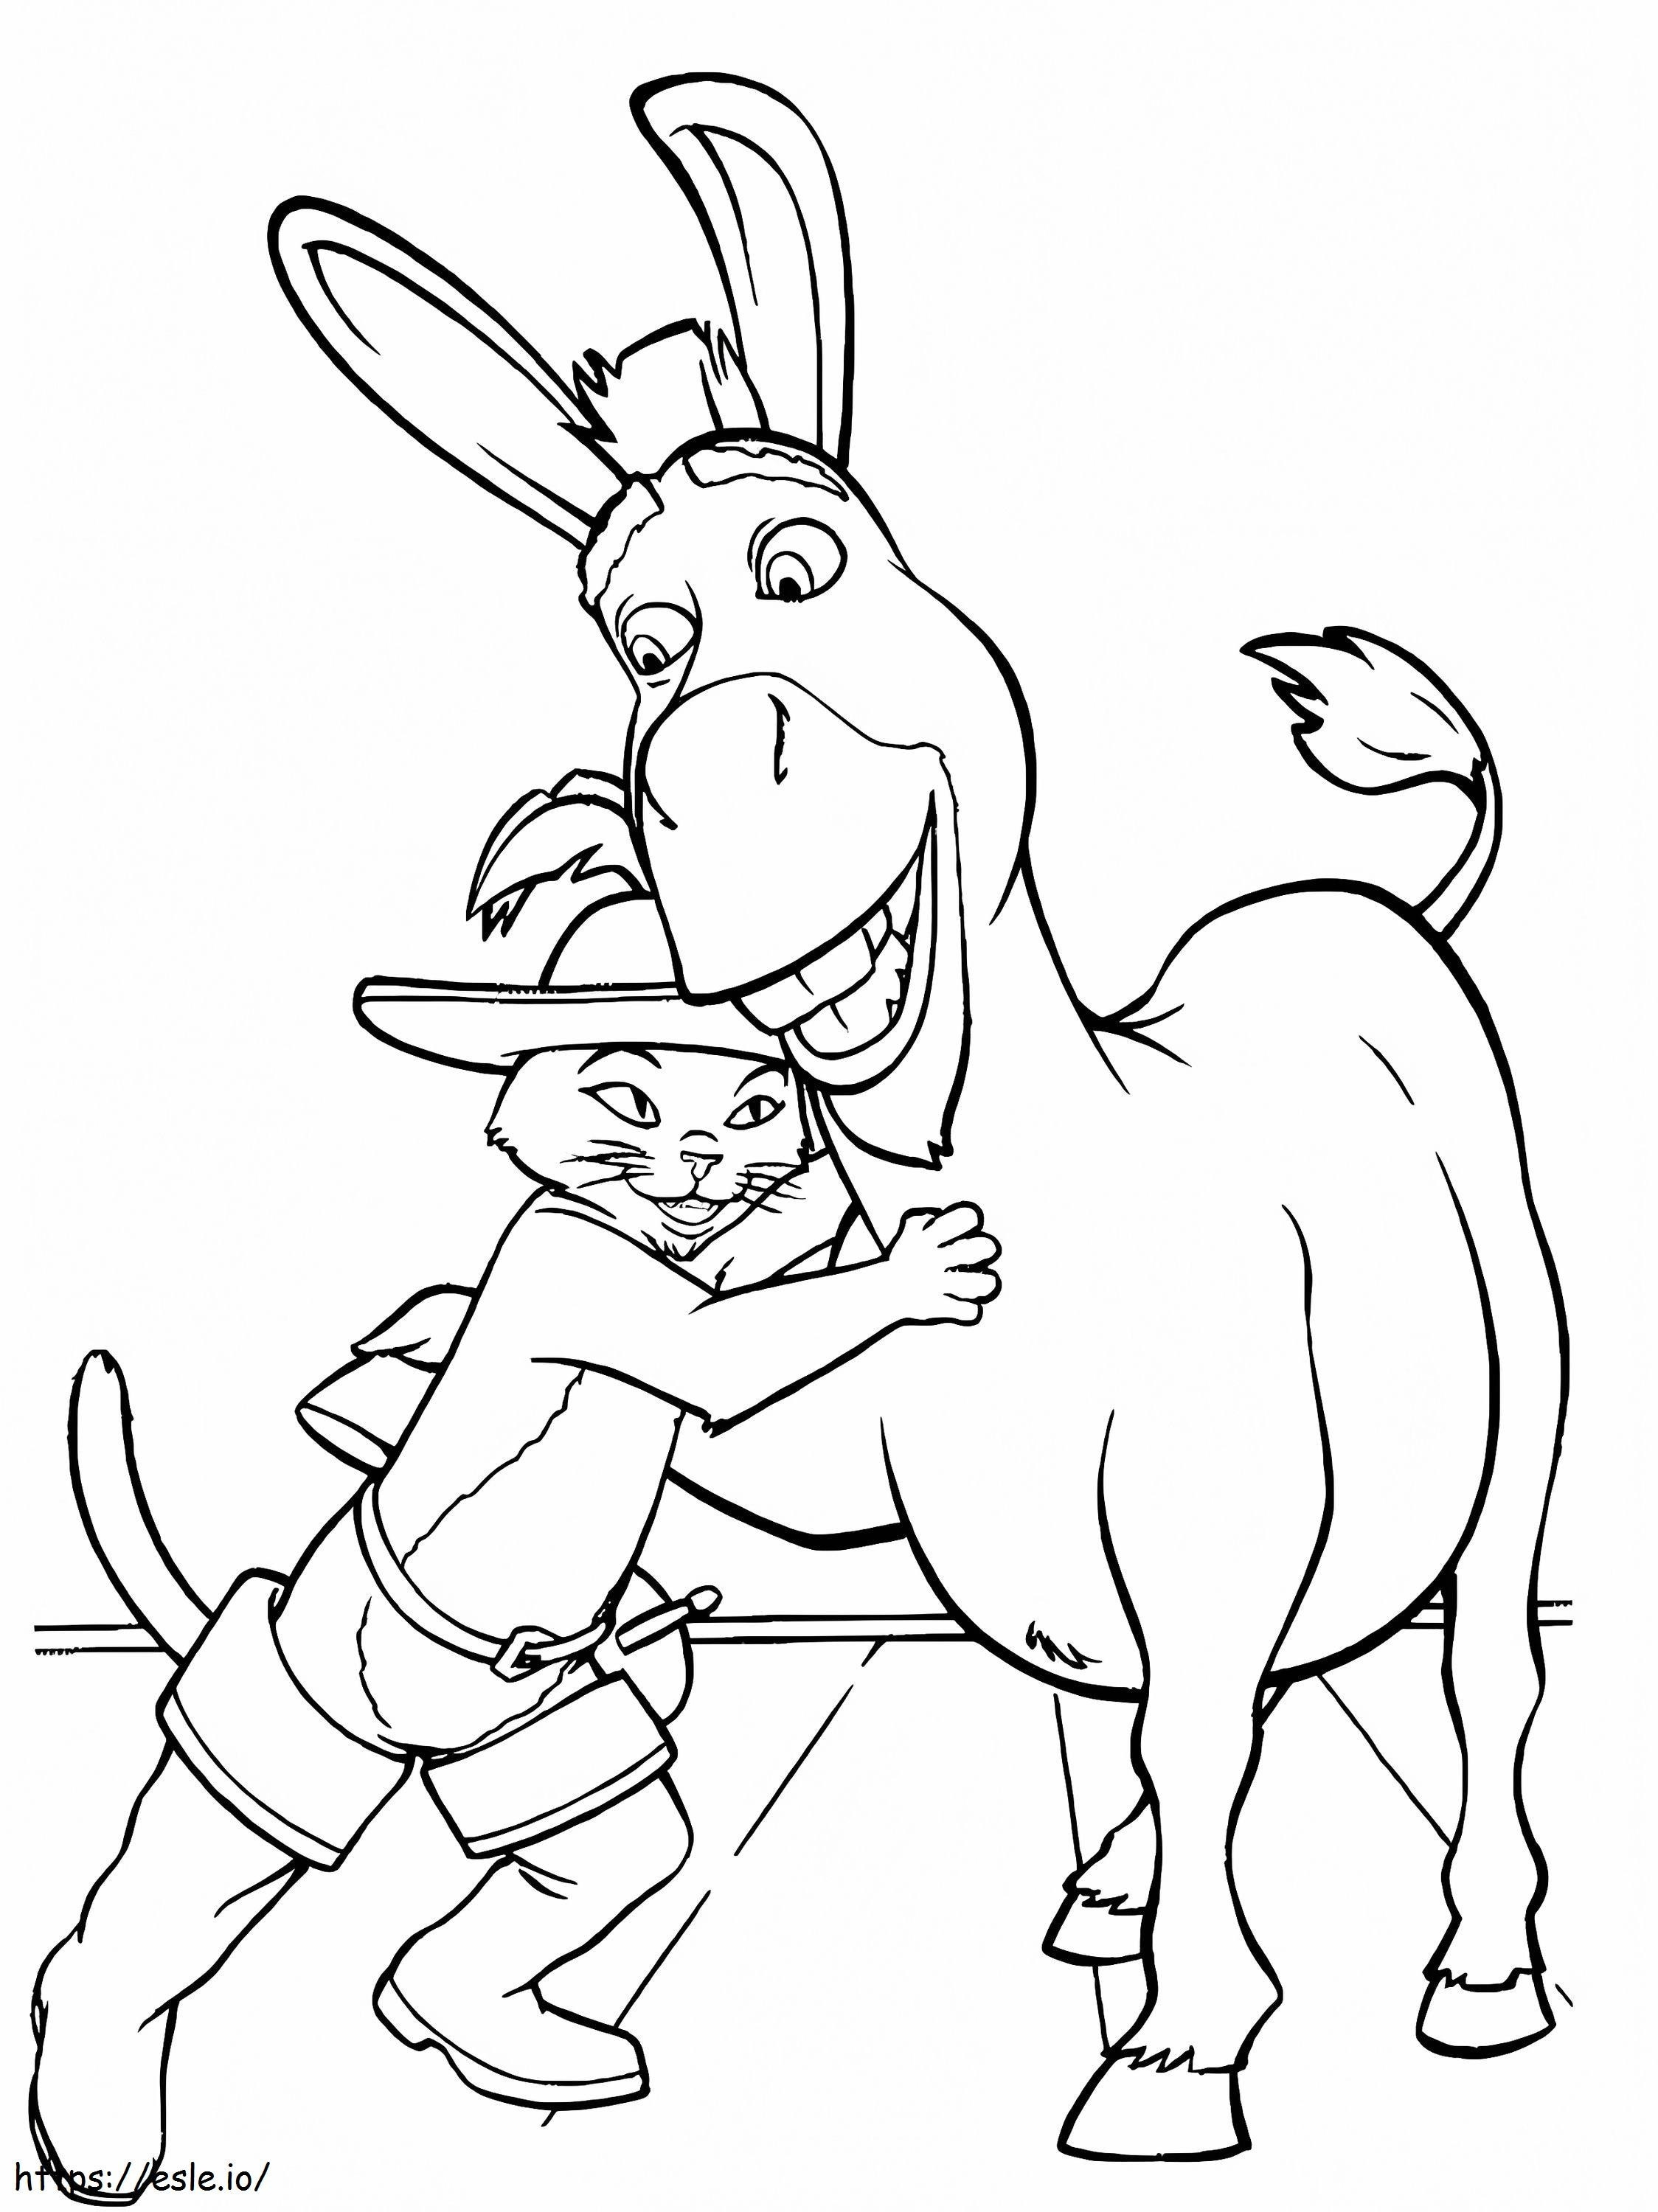 Donkey And Cat coloring page